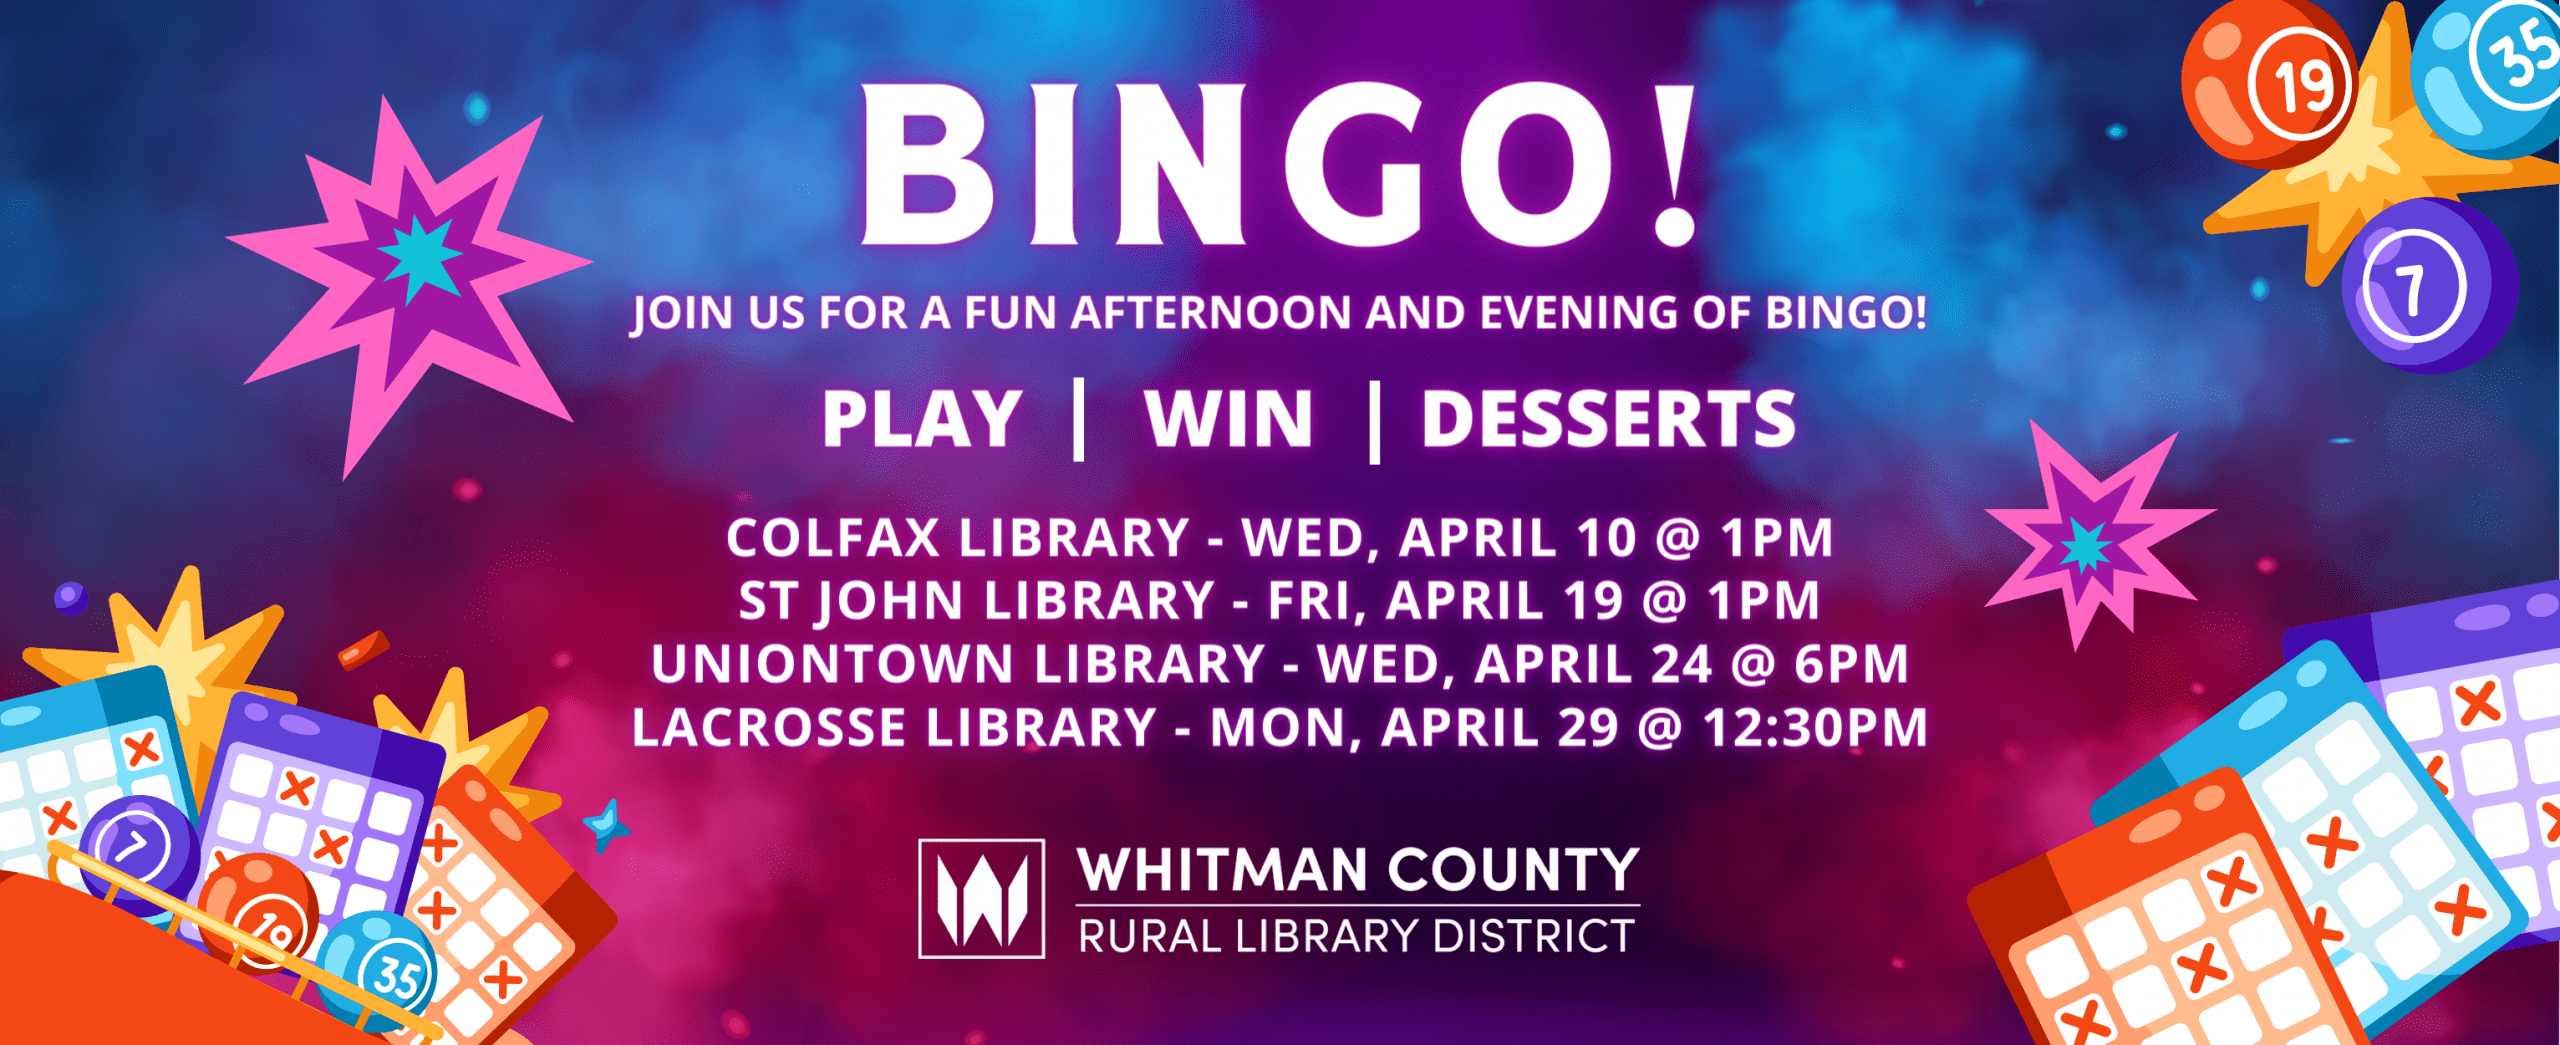 Don't miss all of the BINGO fun that will be happening across the county with WCL this month! Colfax, St. John, Uniontown, and LaCrosse libraries are all offering programs. Click here for details. 